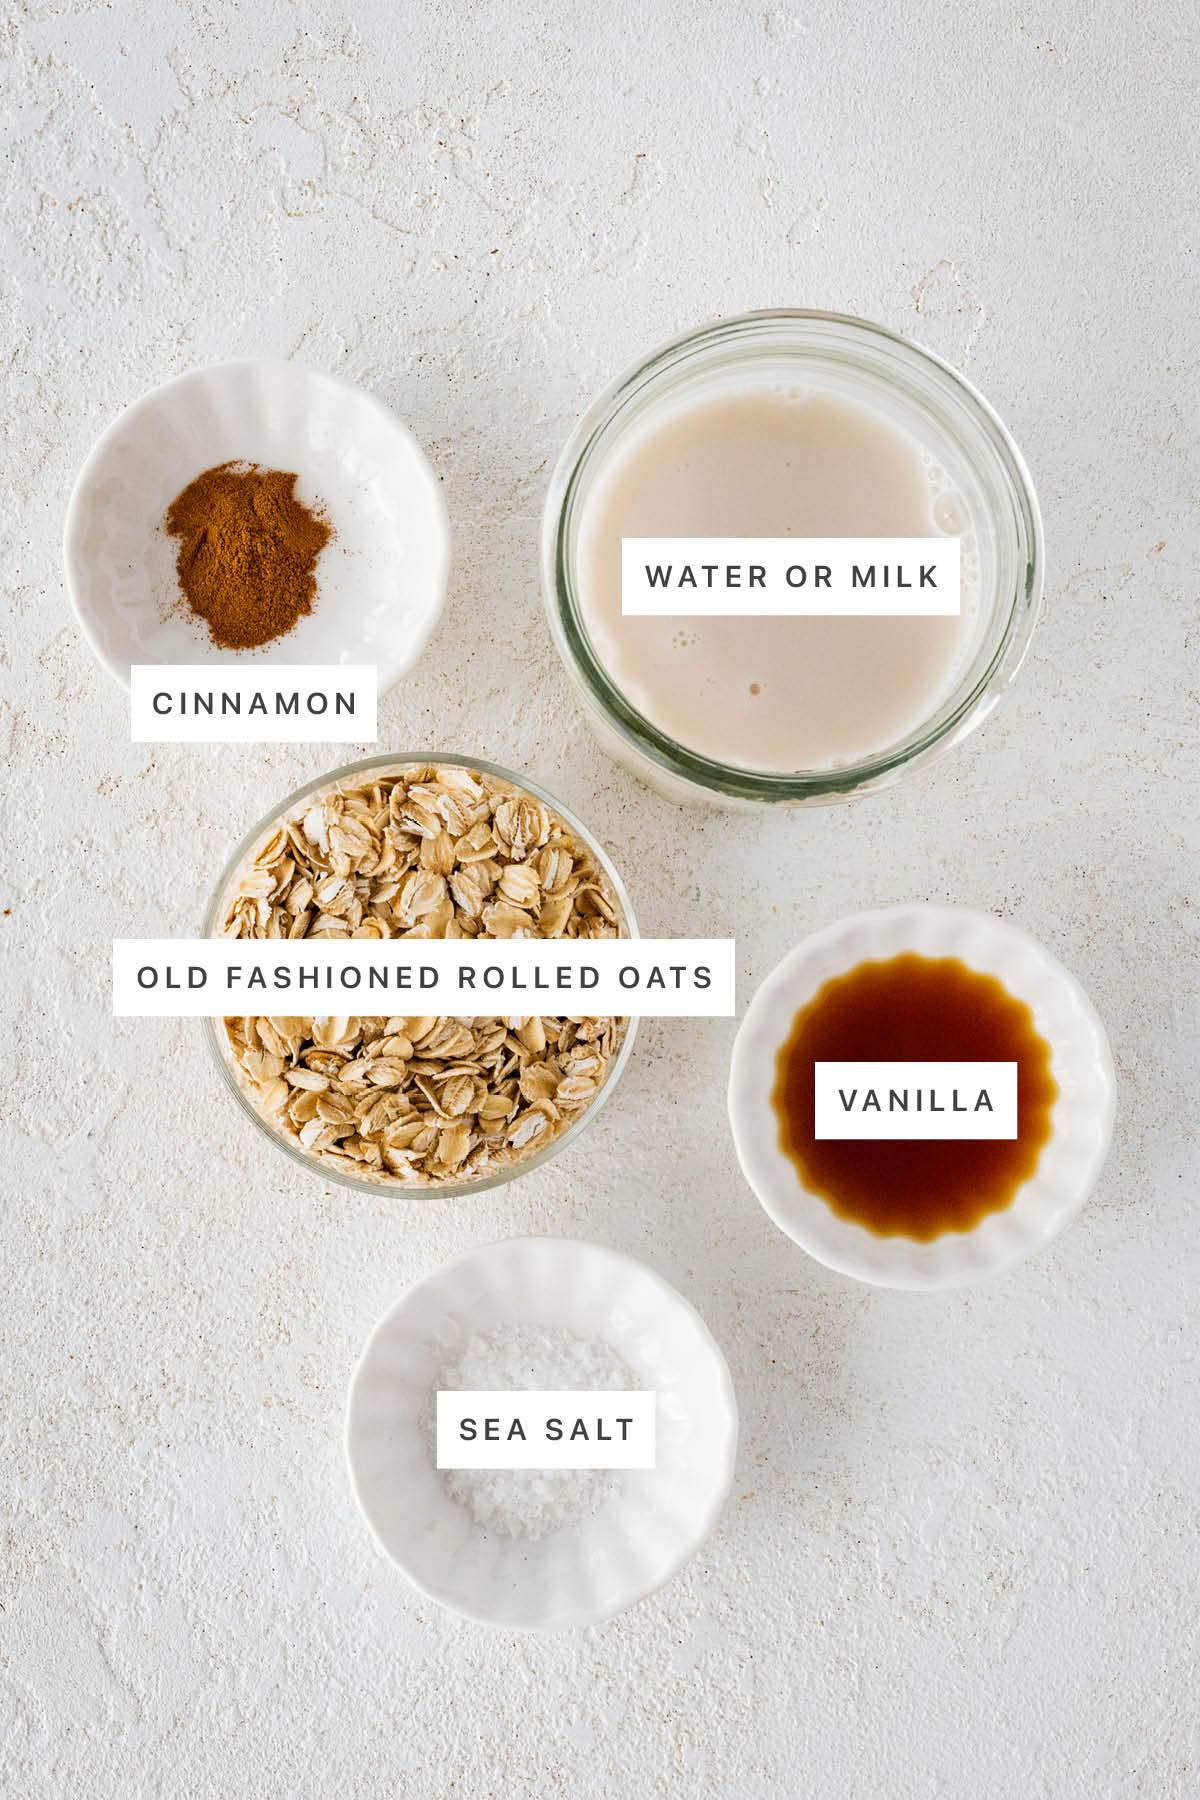 Ingredients measured out to make oatmeal: cinnamon, milk, oats, vanilla and sea salt.